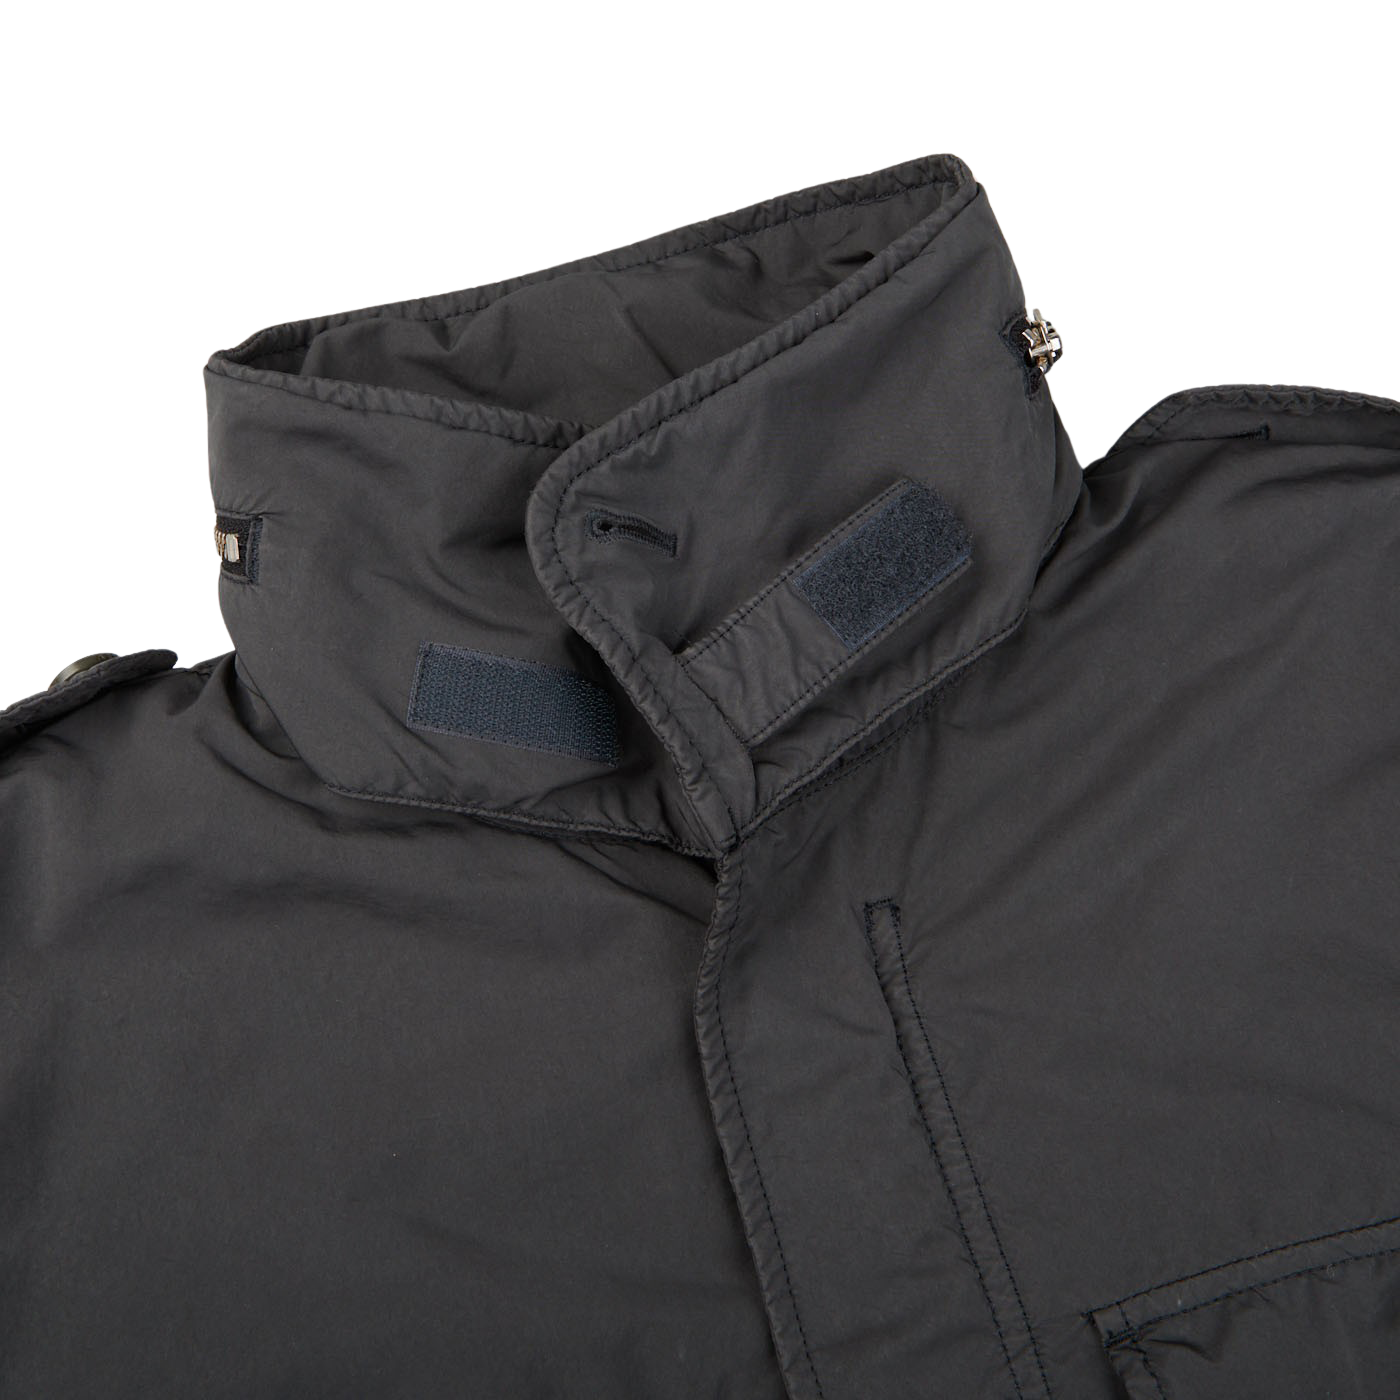 A close up of an Aspesi Grey Luxury Nylon Padded Field Jacket on a white background.